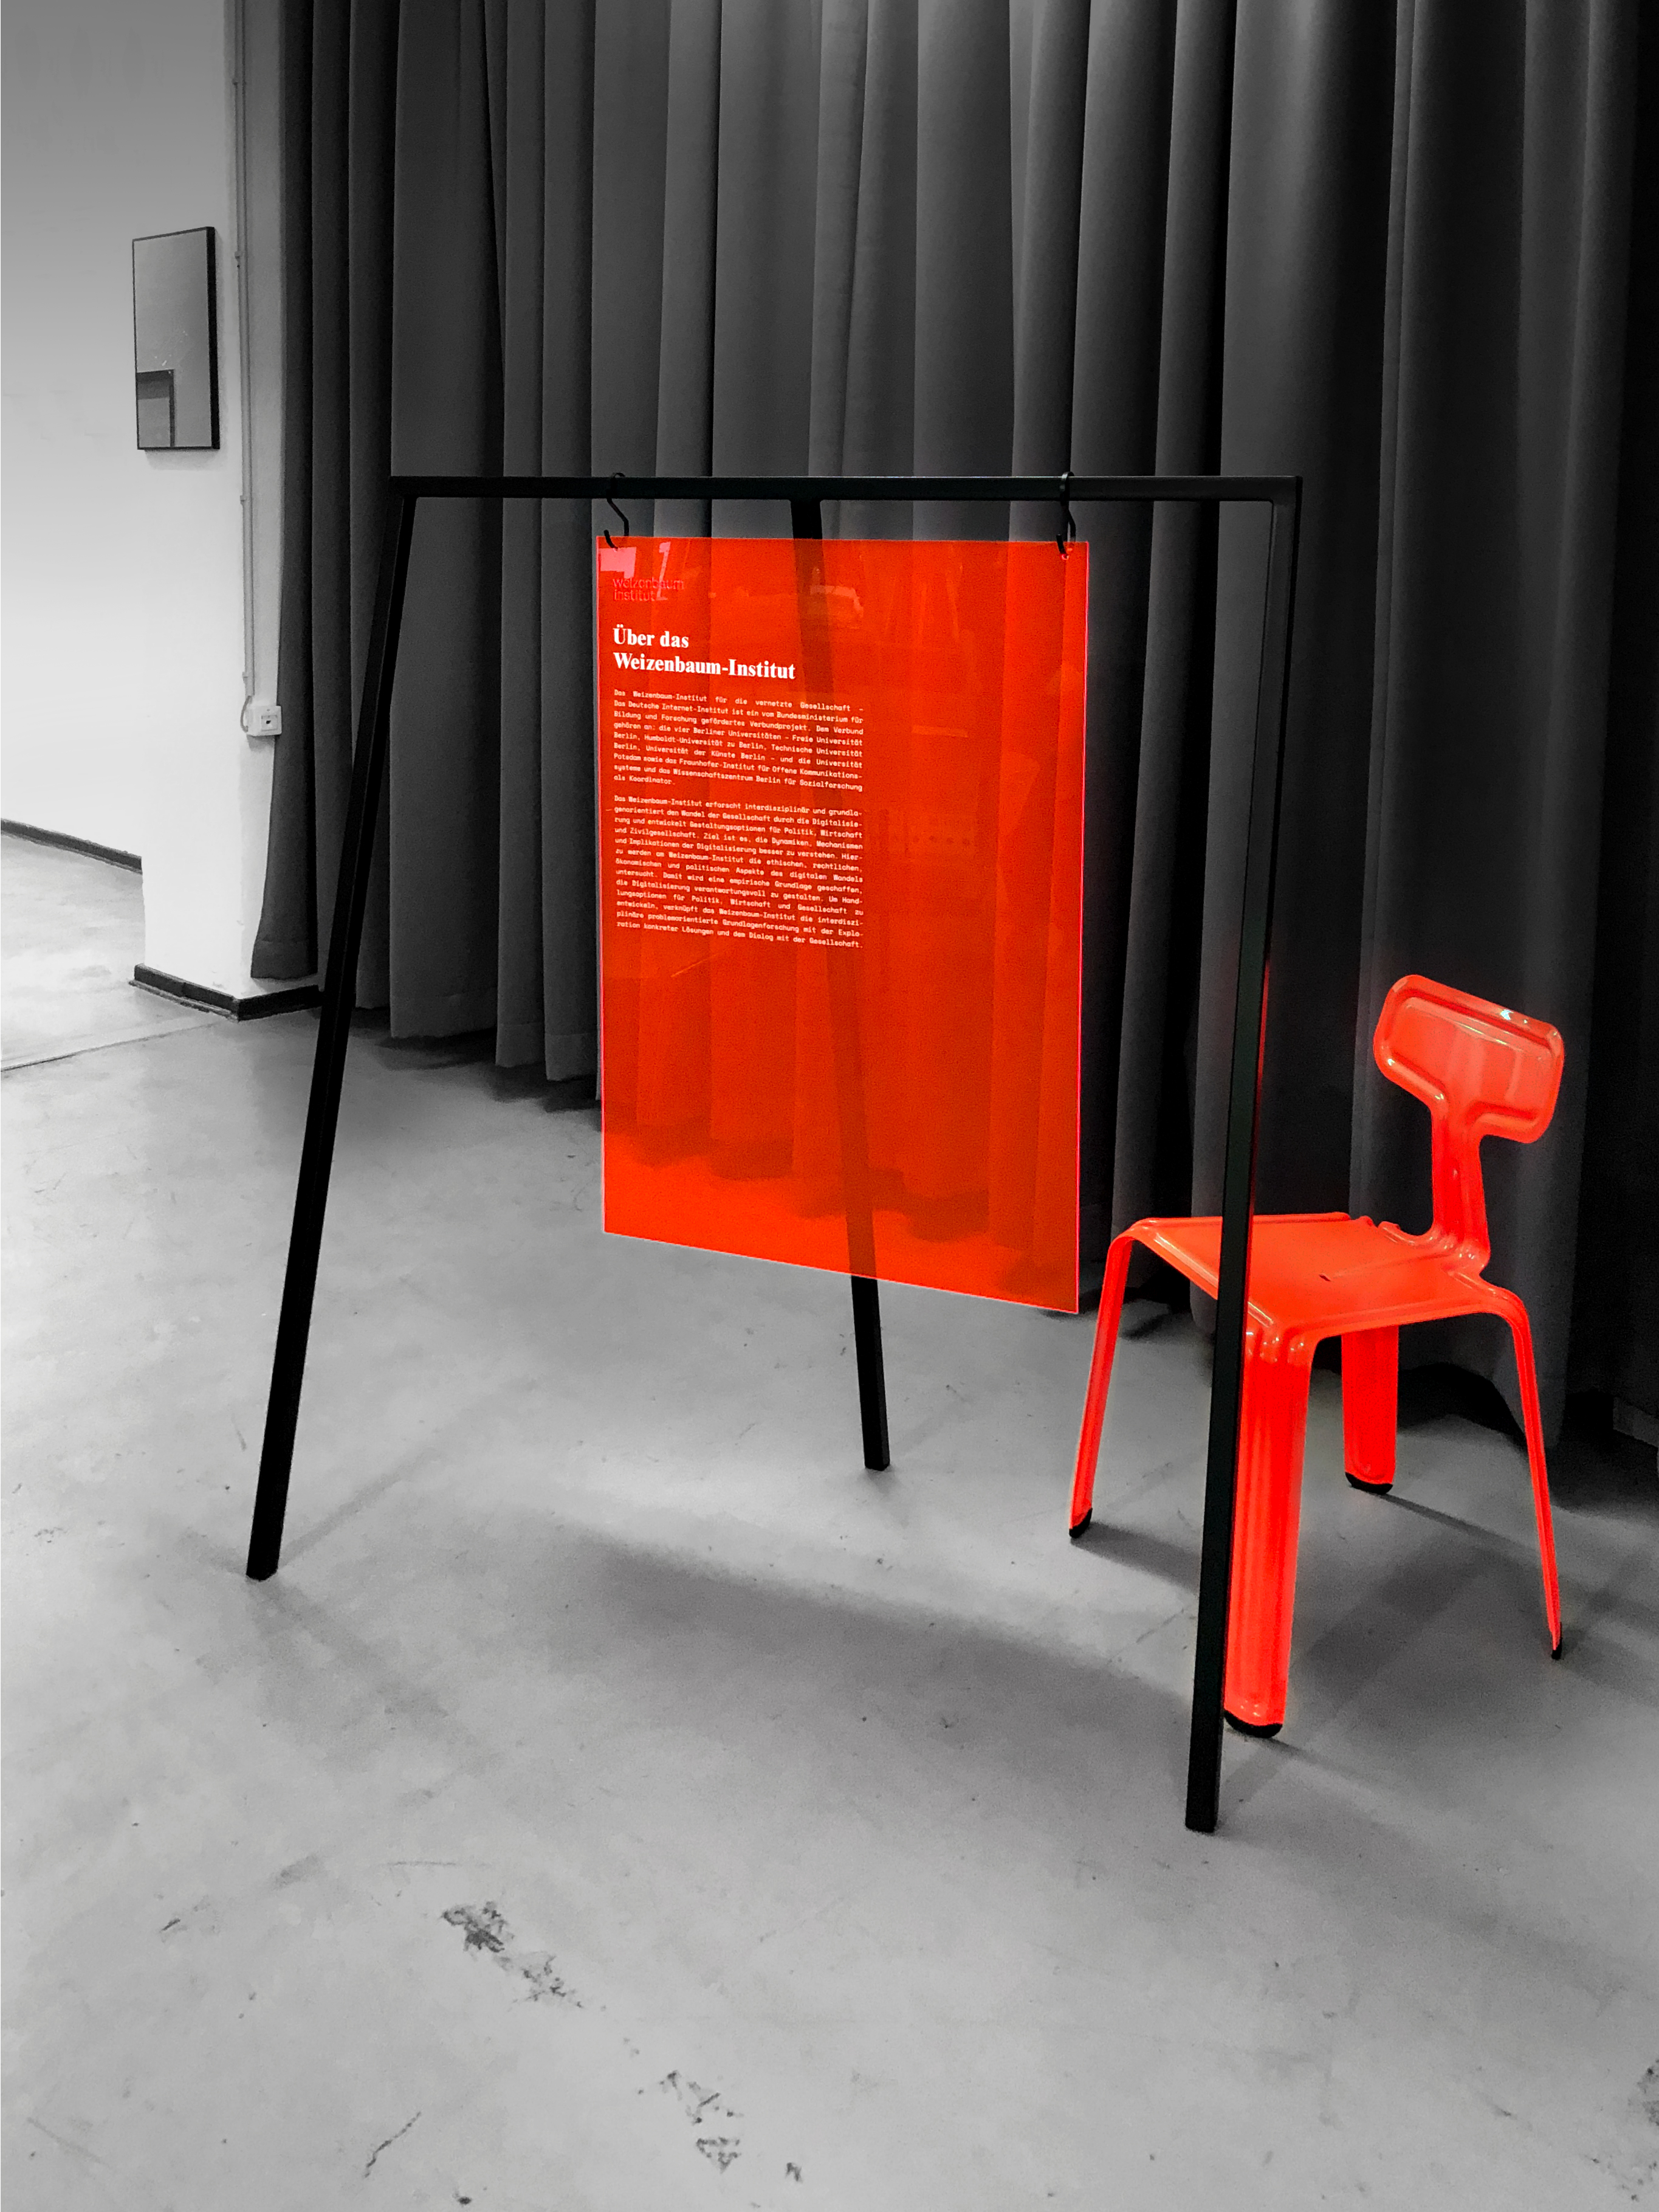 A photo showcasing a semi-transparent red acrylic poster hung on a metal frame and a red metallic chair to the right side, in the background a black curtain can be seen.